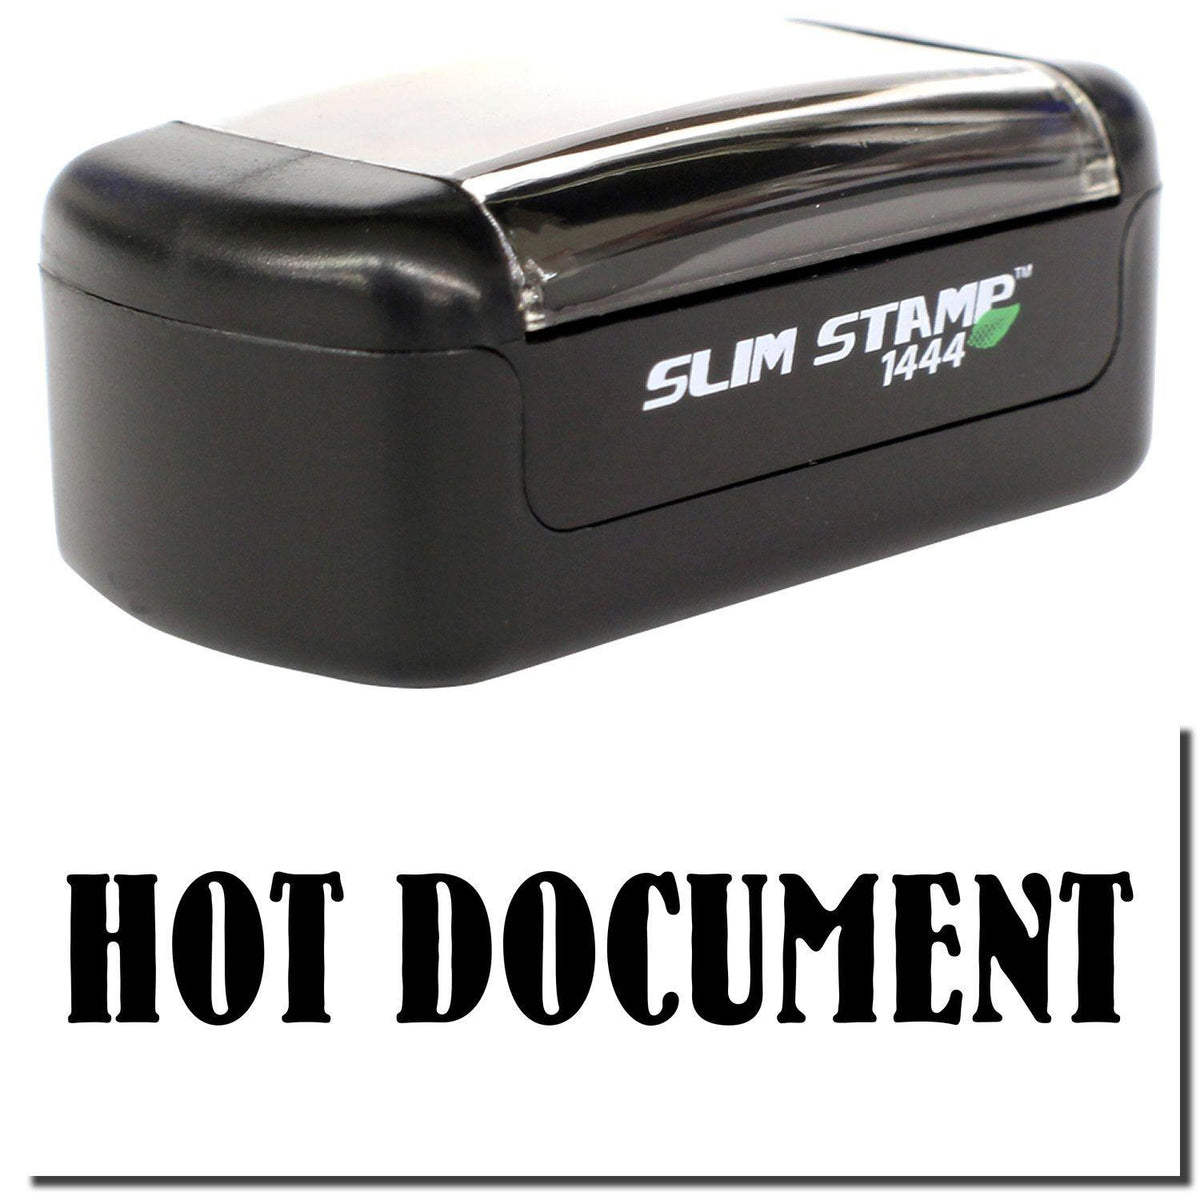 A stock office pre-inked stamp with a stamped image showing how the text &quot;HOT DOCUMENT&quot; is displayed after stamping.